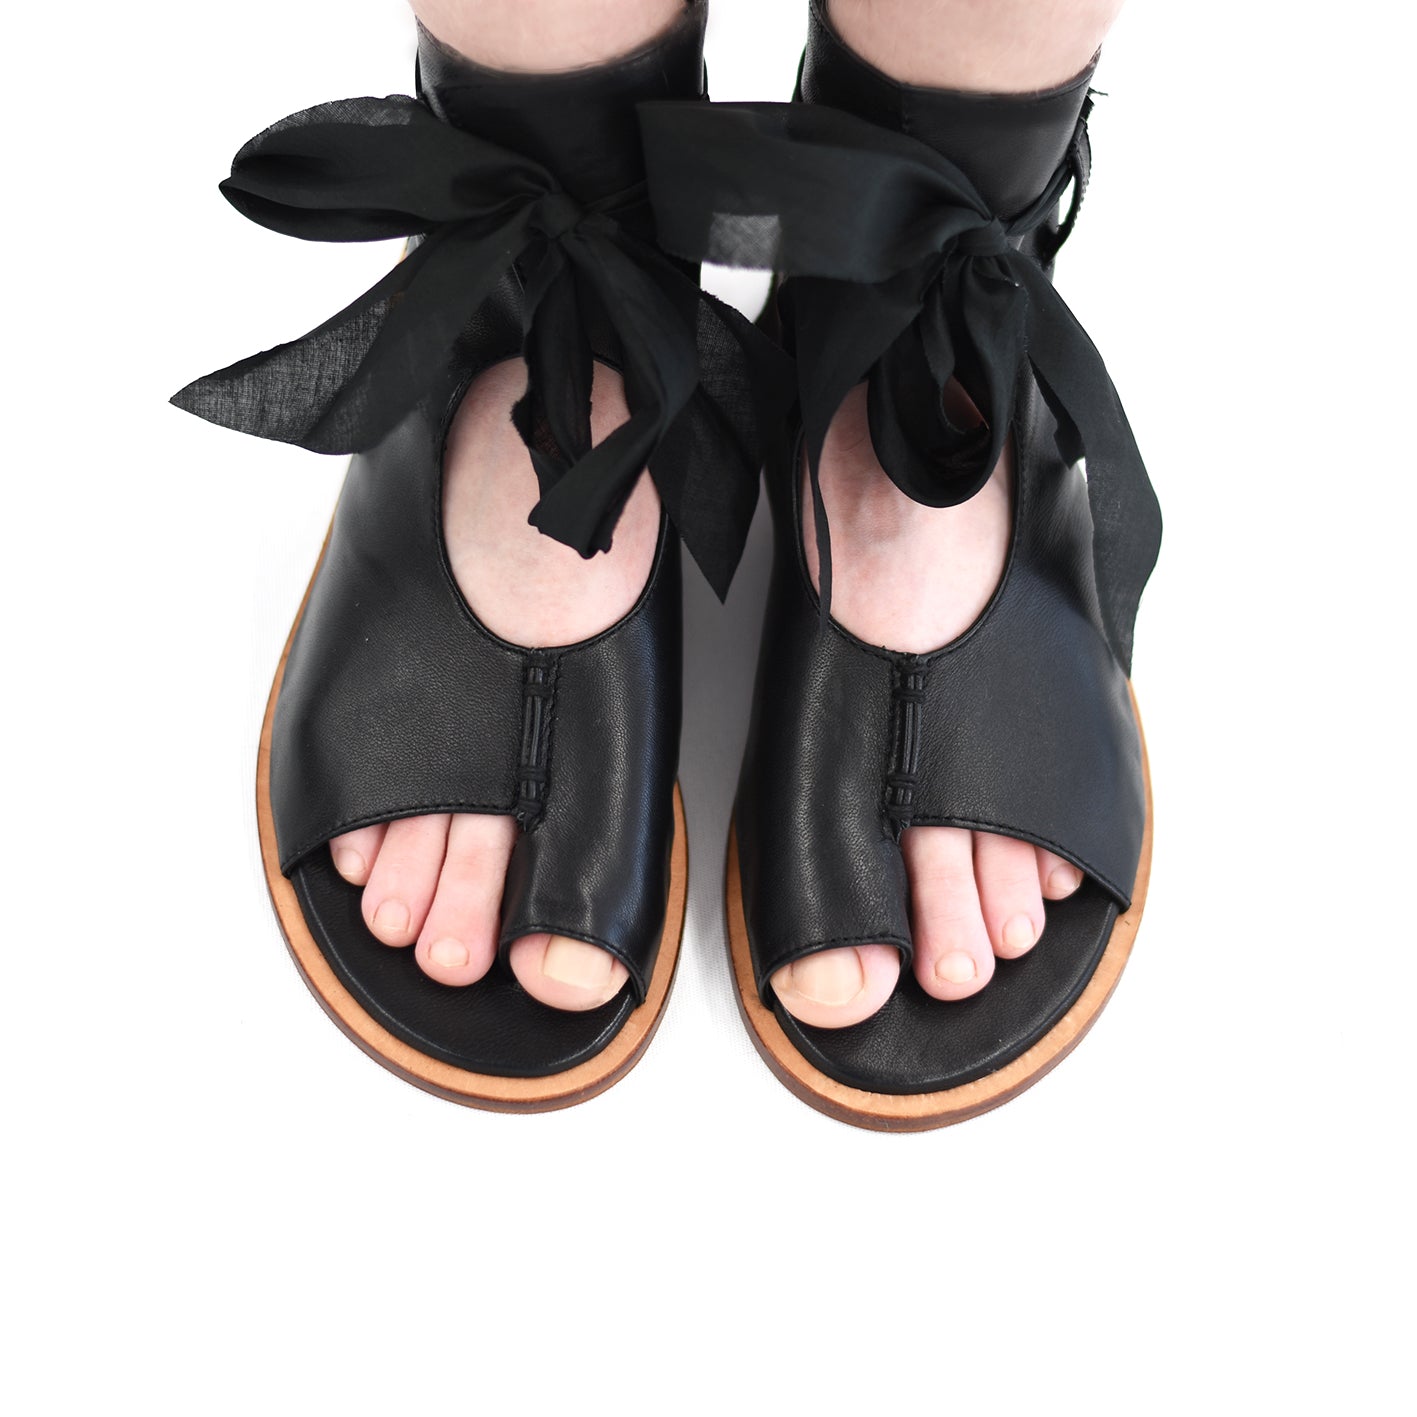 The Augusta Shoe - Black, New edgy everyday sandal